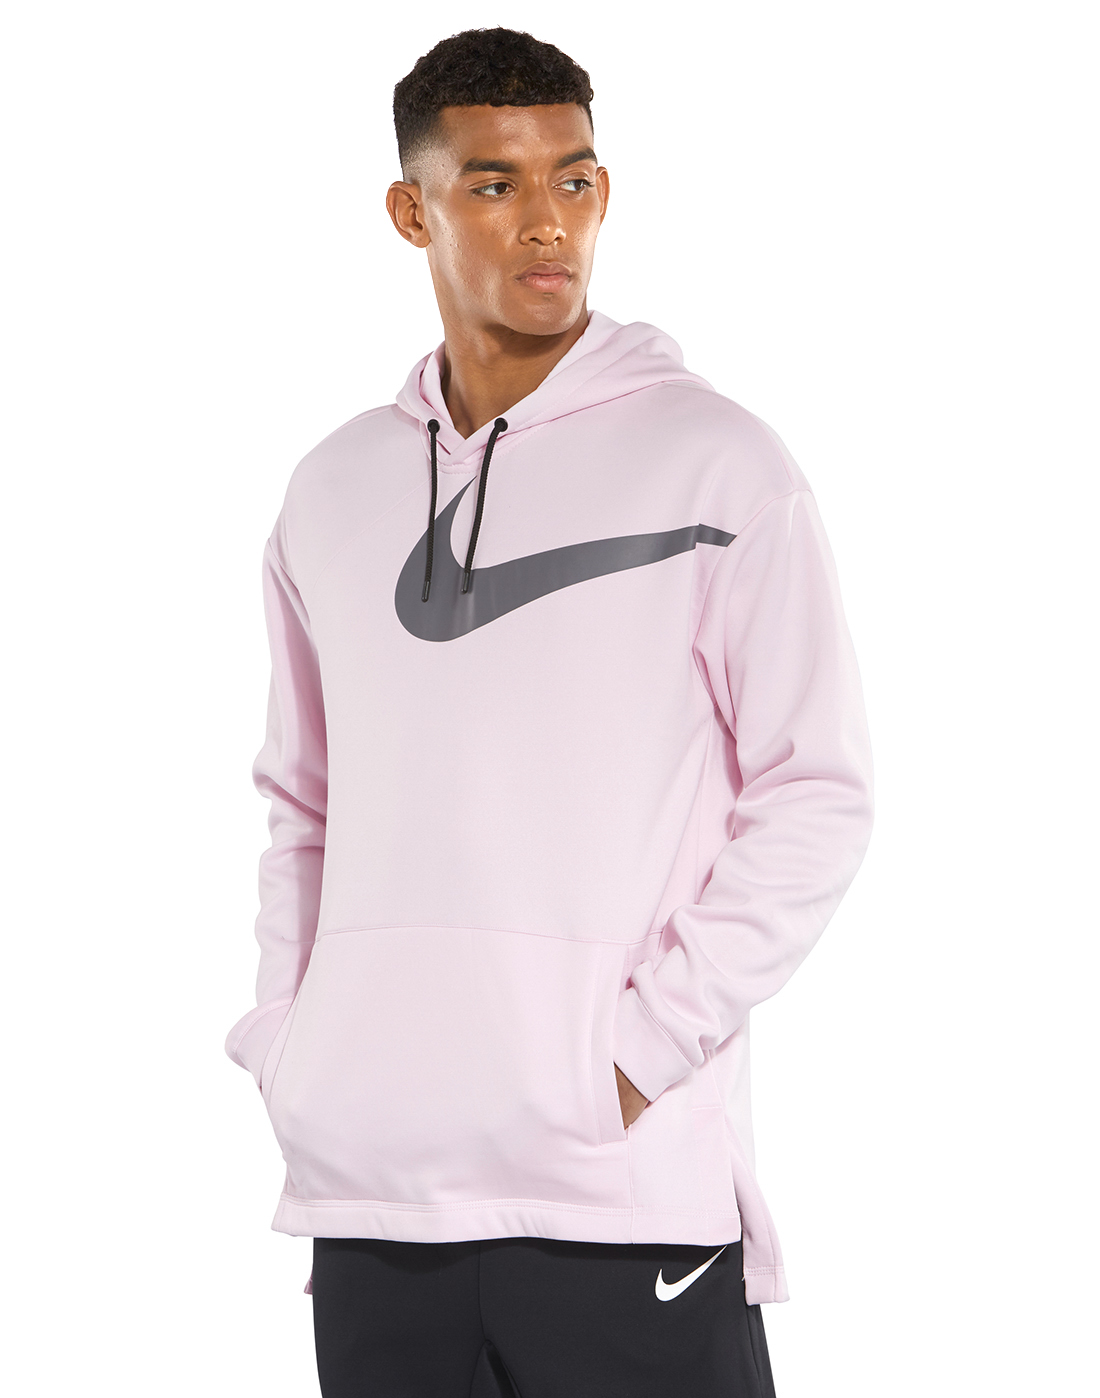 Men's Pink Nike Project X Therma Hoodie | Life Style Sports